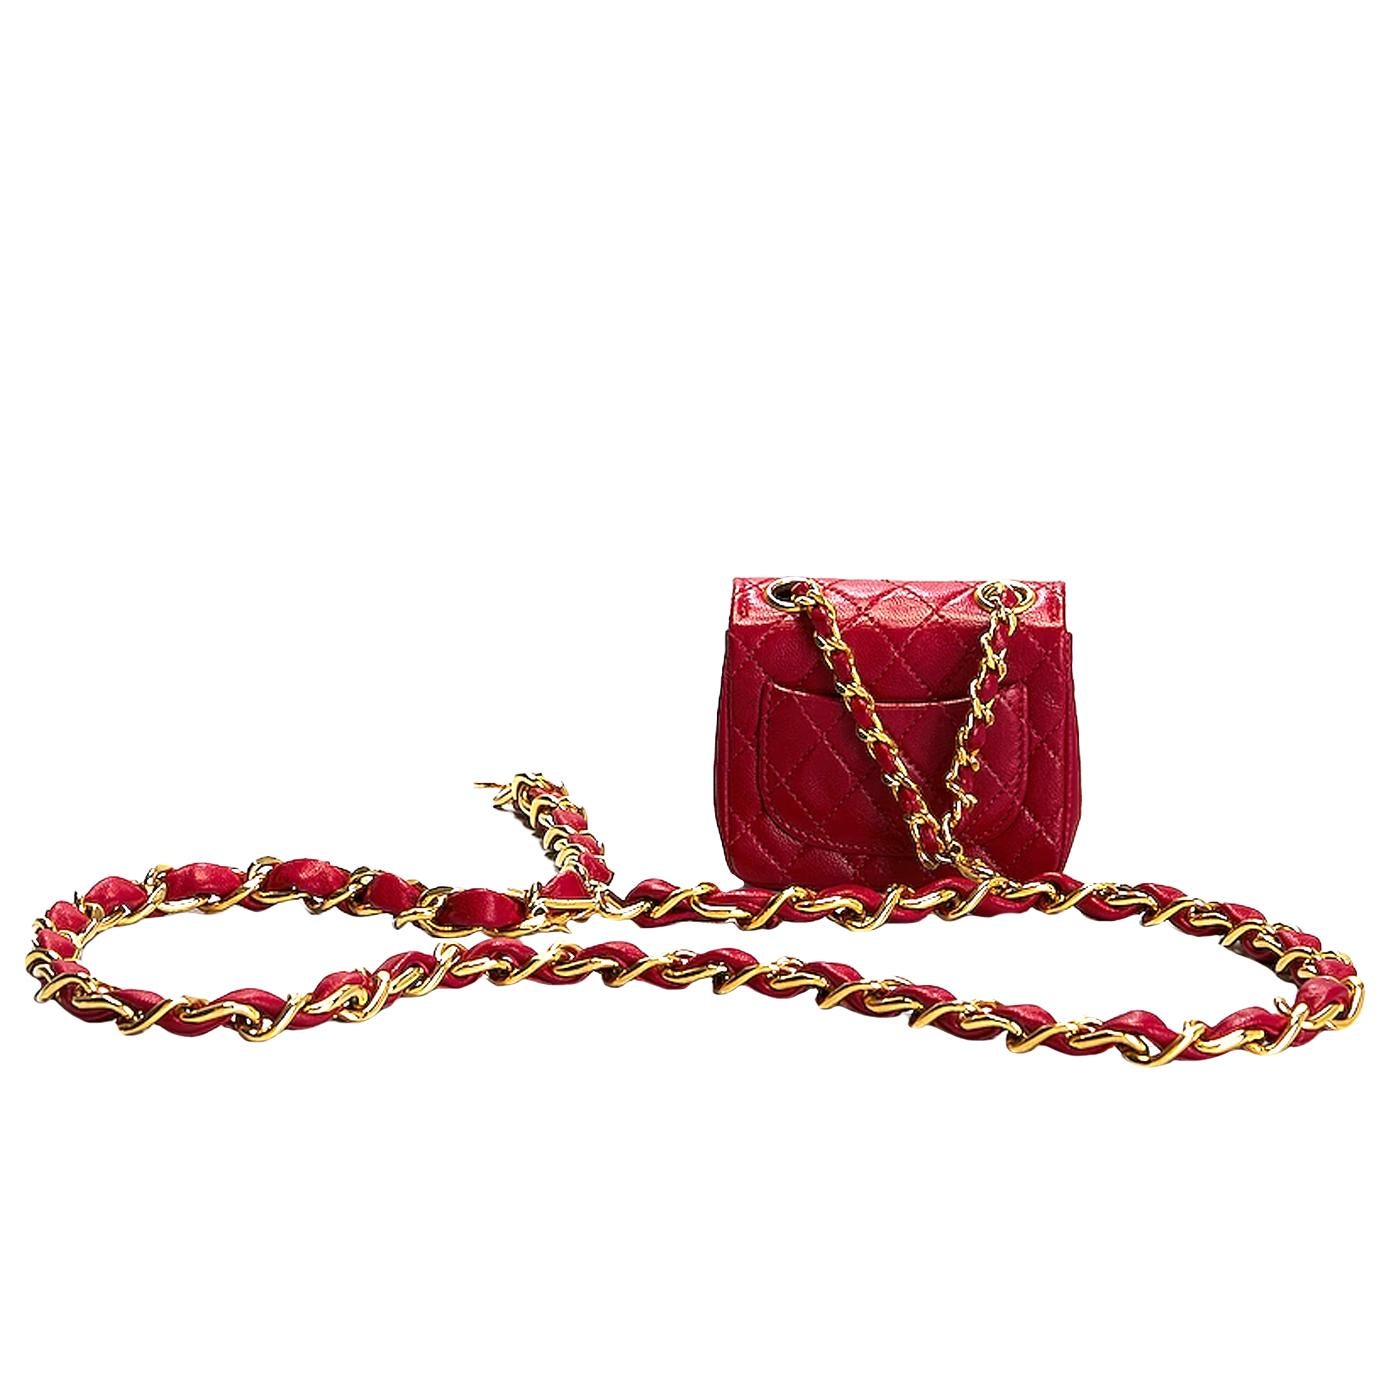 Chanel Matelasse Chain Fanny Belt Red Lambskin Renew Leather Bag In Good Condition For Sale In Aventura, FL